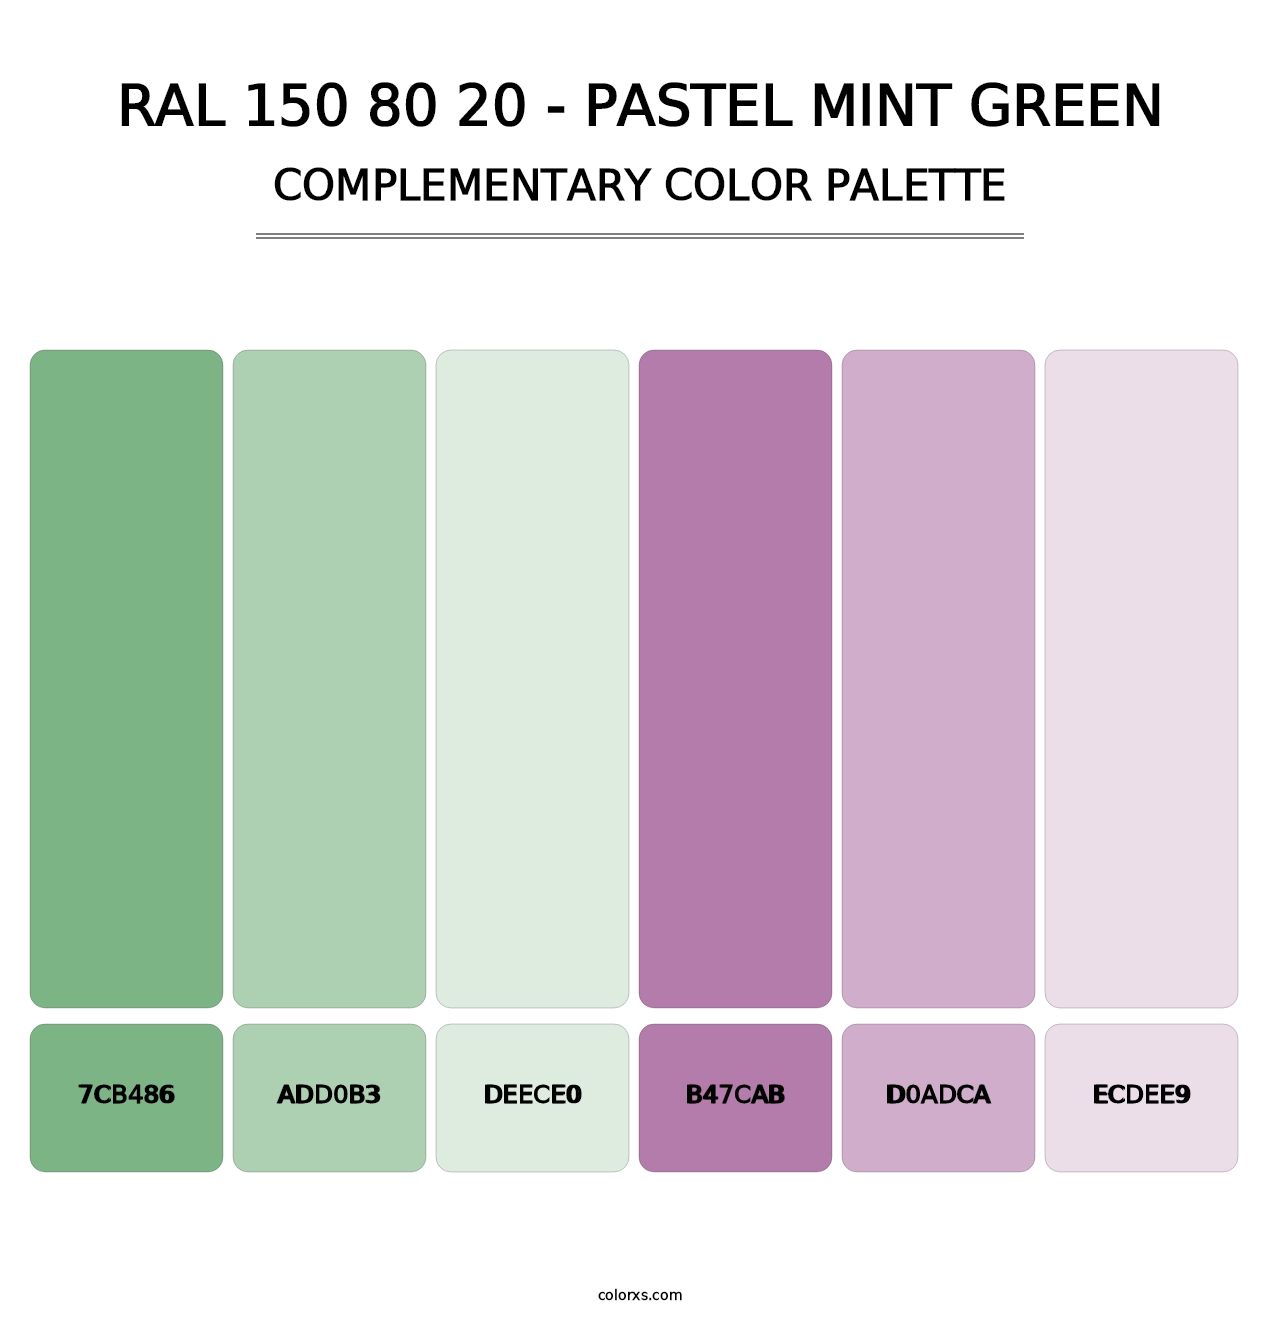 RAL 150 80 20 - Pastel Mint Green - Complementary Color Palette